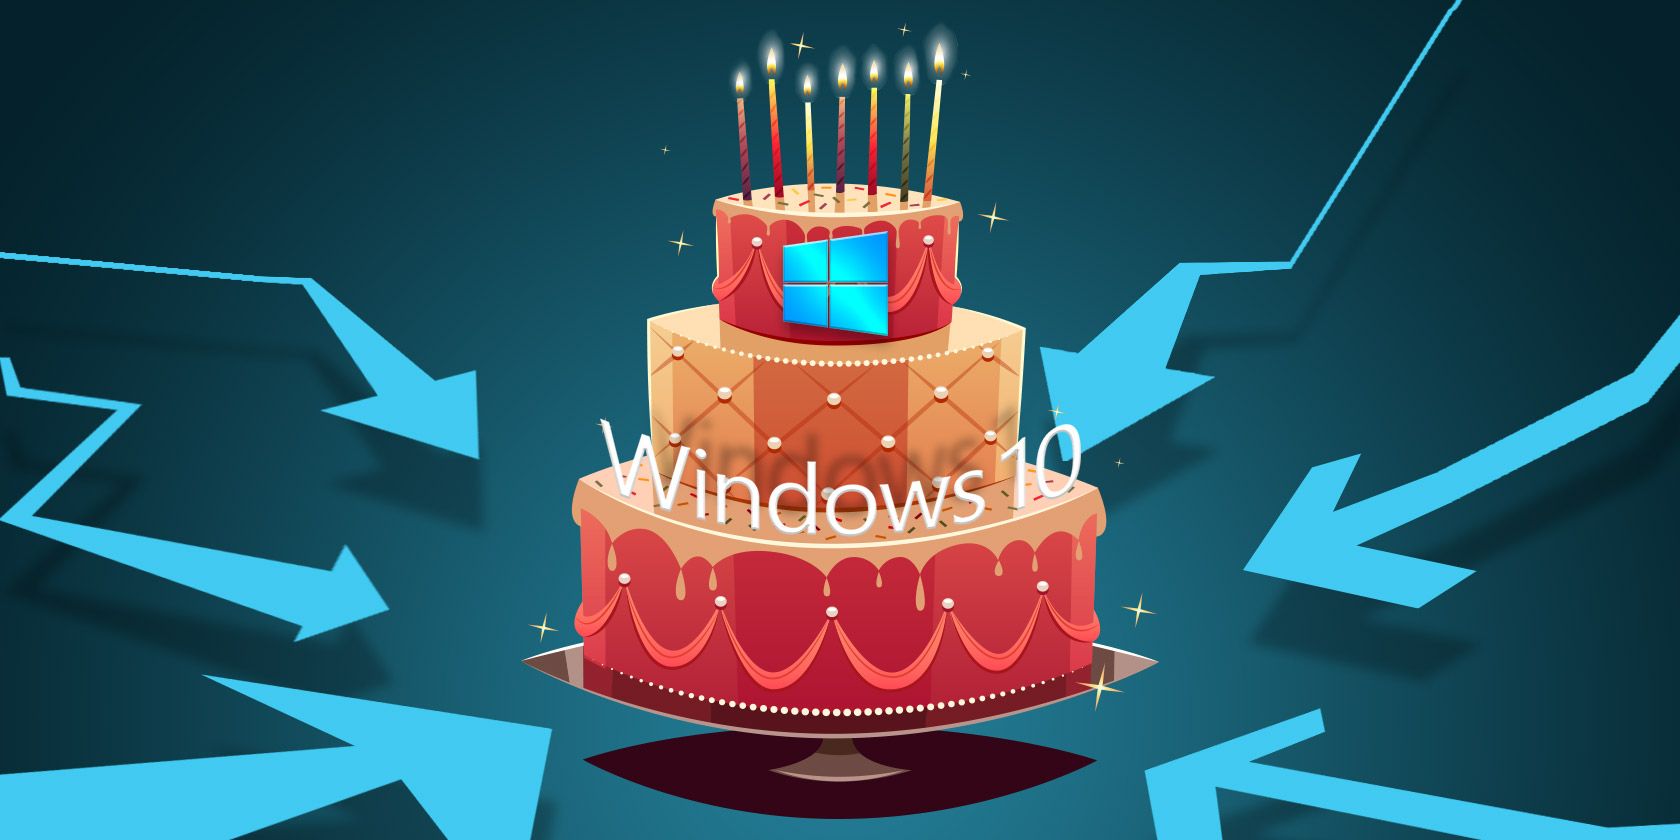 How To Get The Windows 10 Anniversary Update Now